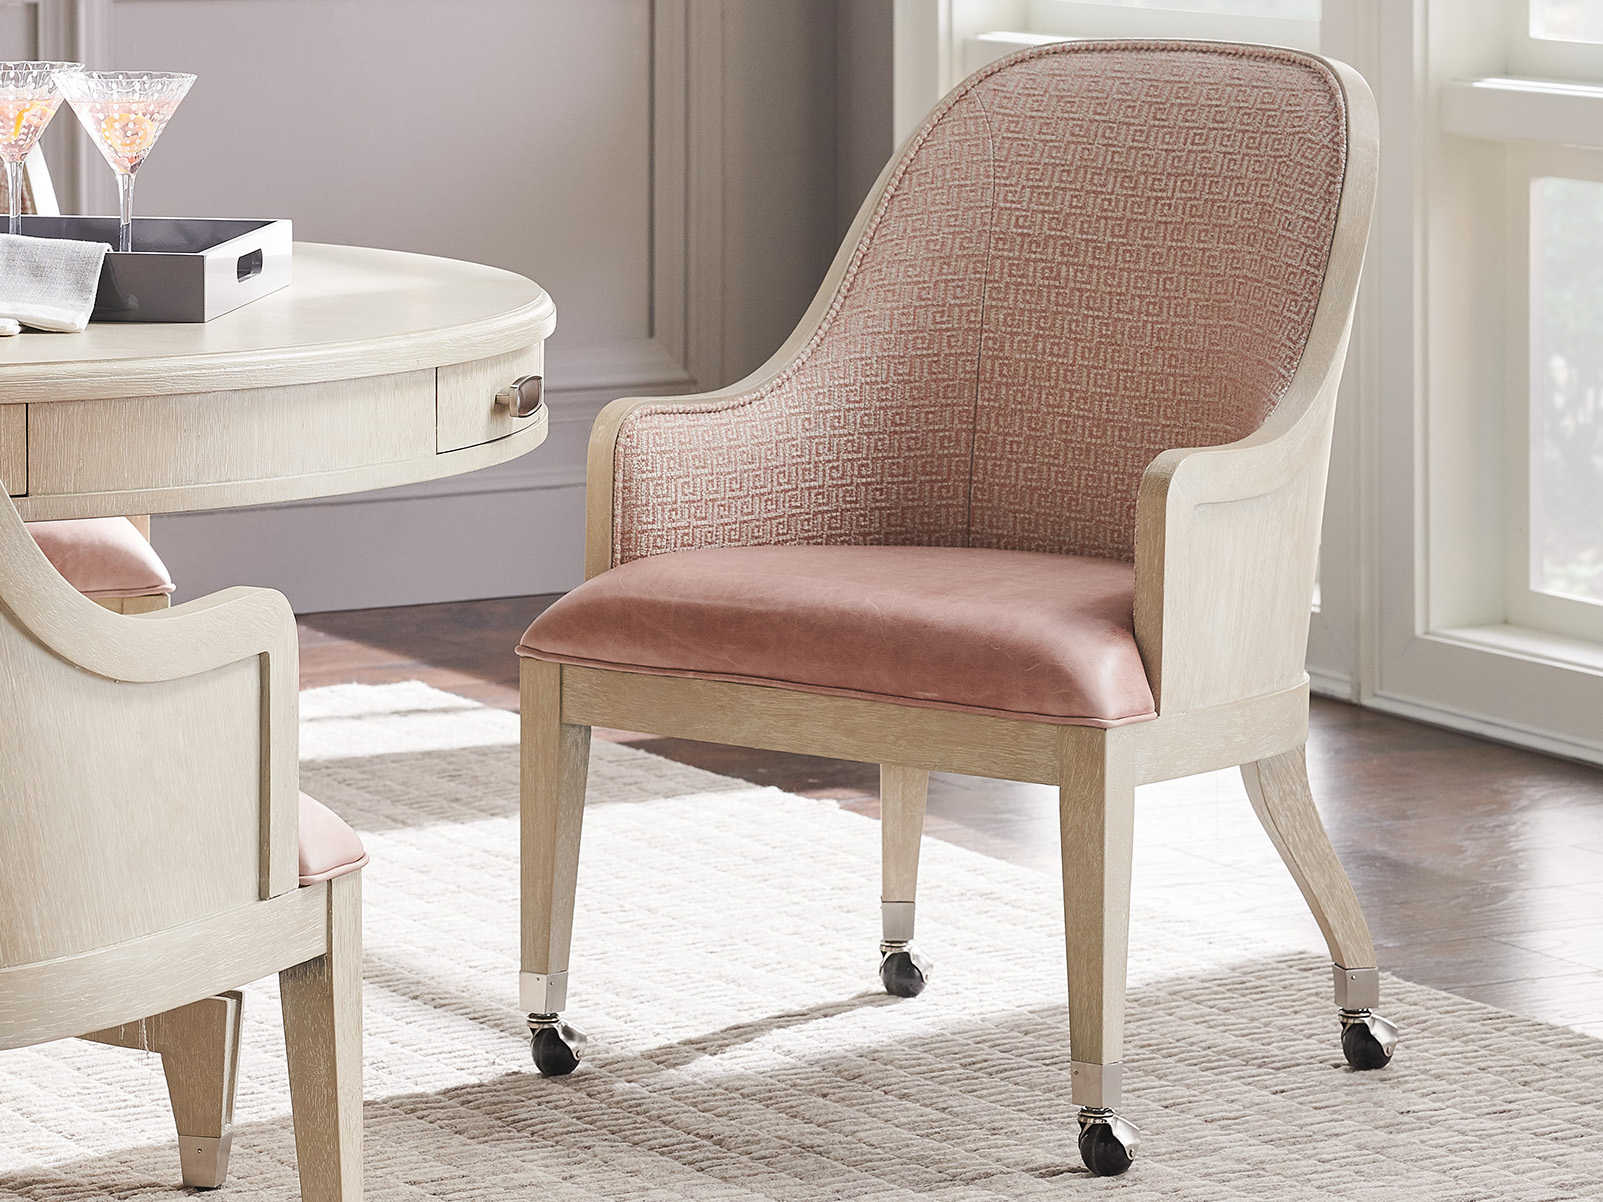 Dining Chair With Armrest : Fully Upholstered Dining Chair (Arm) - We